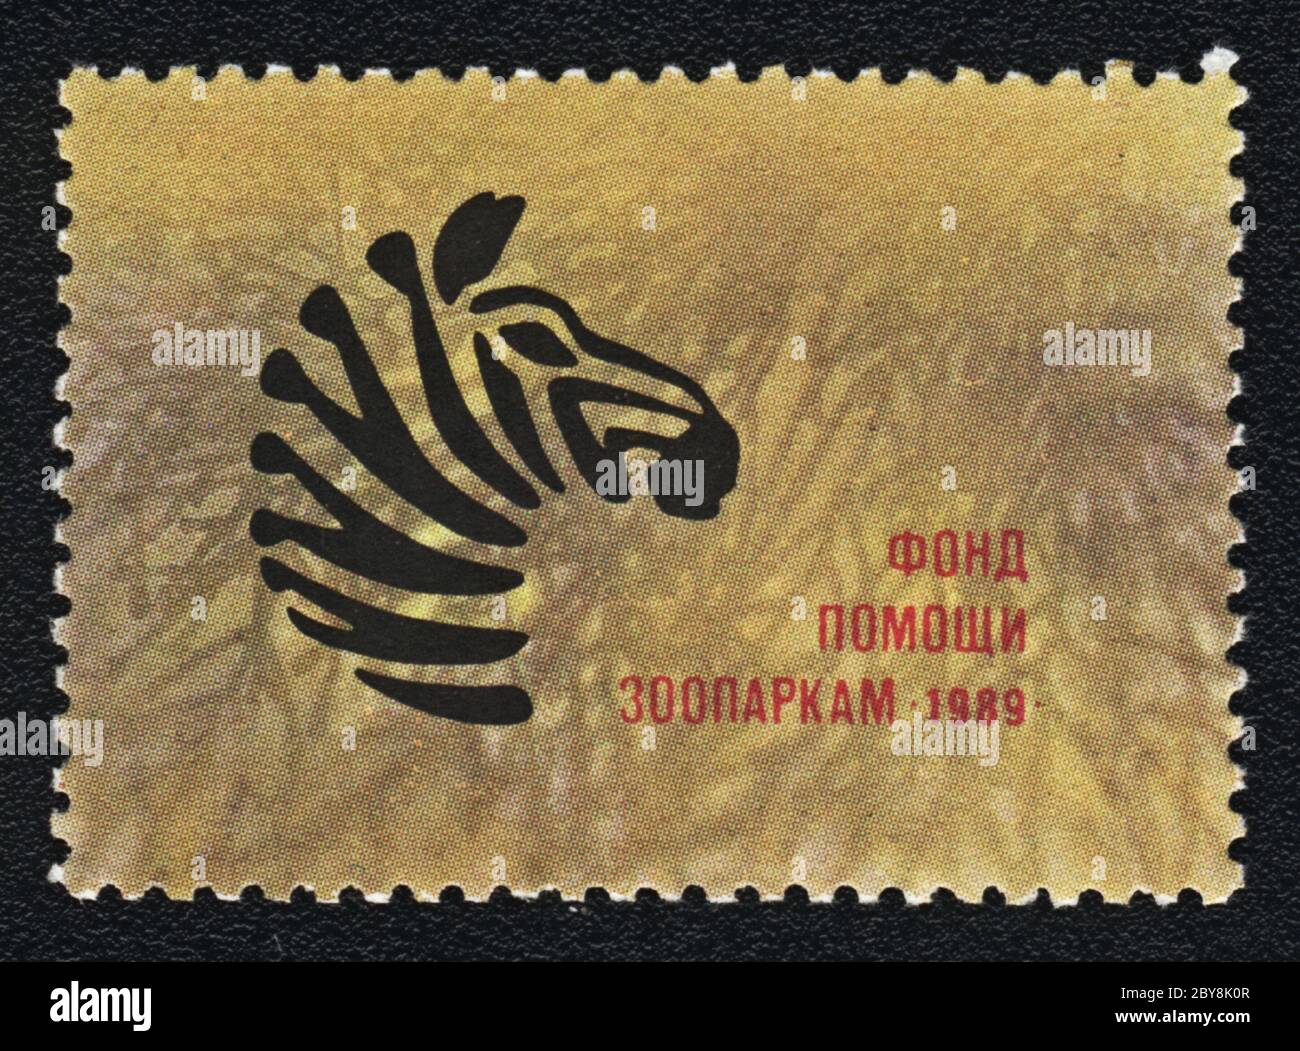 Zoo Assistance Fund. Postage stamp USSR, 1989 Stock Photo